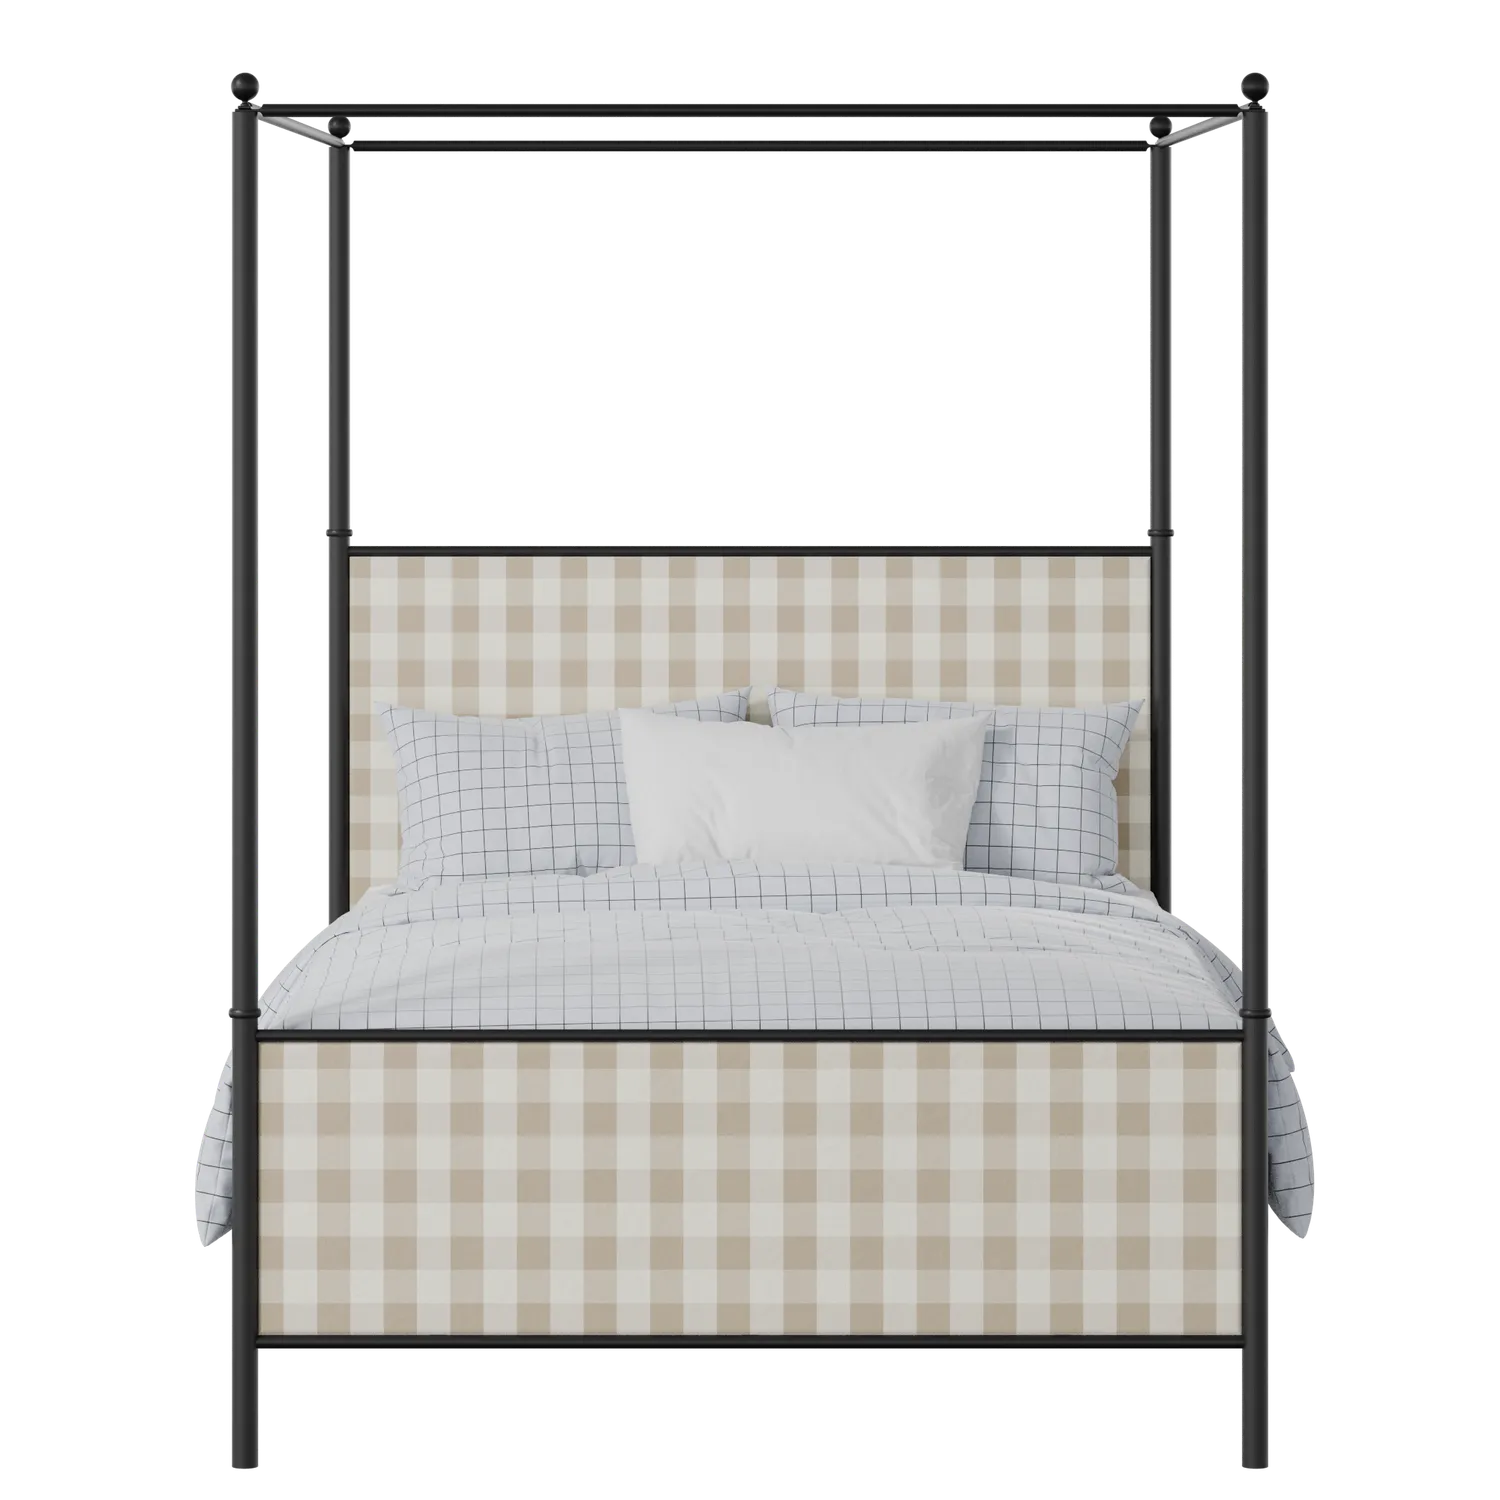 Reims iron/metal upholstered bed in black with Romo Kemble Putty fabric